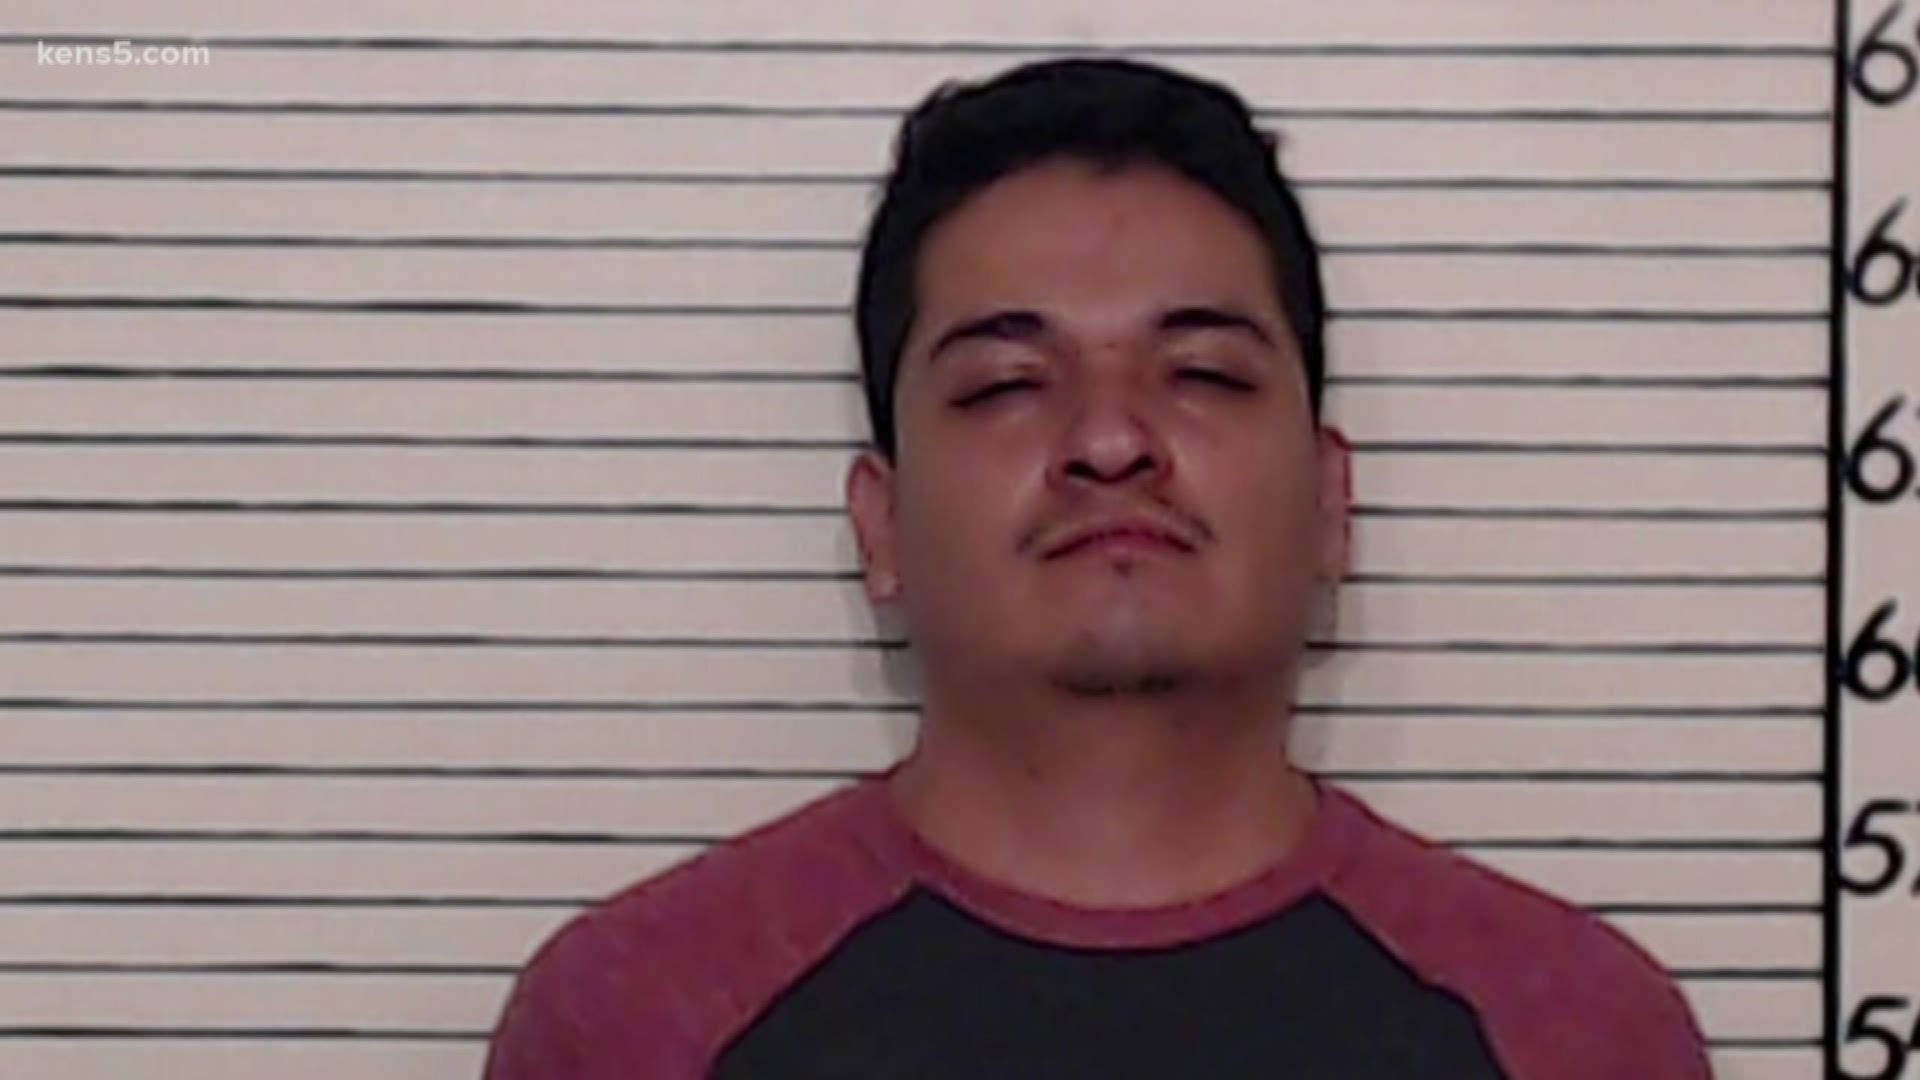 On August 12, police say Hermes Mendez went inside a women's restroom and took photos of an 11-year-old girl with his cell phone.